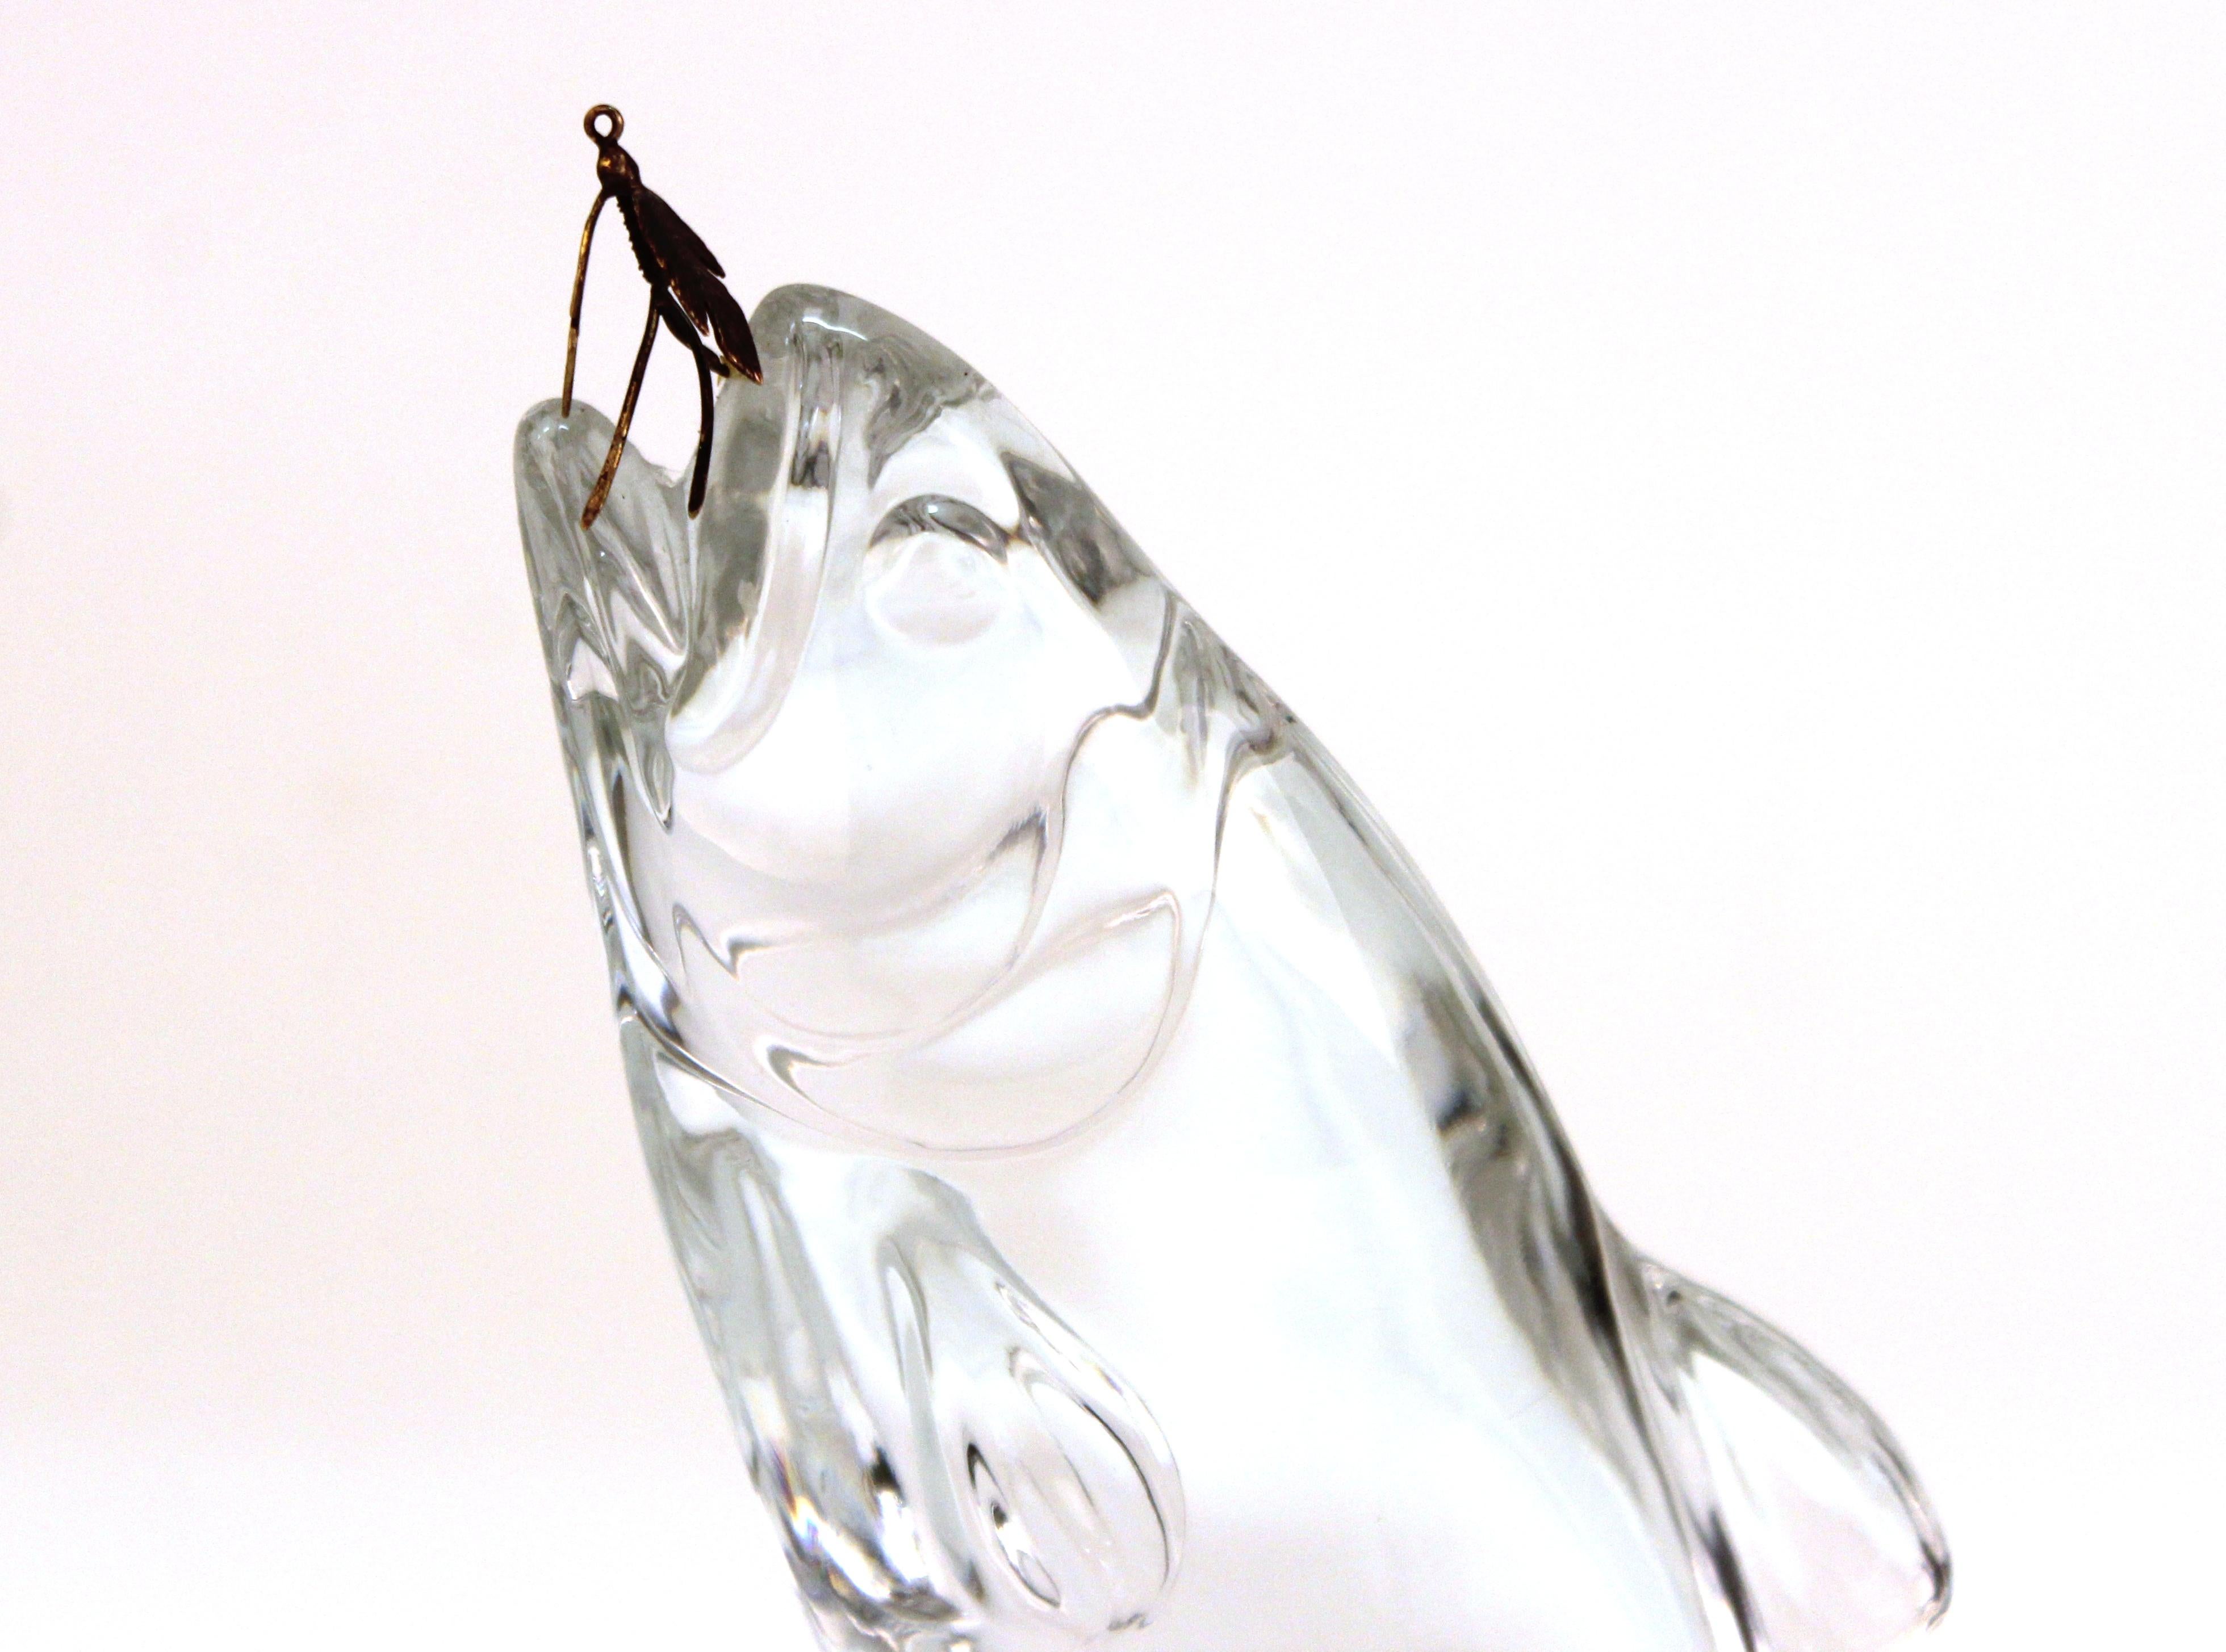 Austrian modern art glass fish with fishing hook in mouth, made in Austria in the late 1980s. The piece has a label 'Made in Austria' and is in great vintage condition with some age-appropriate wear to the bottom.